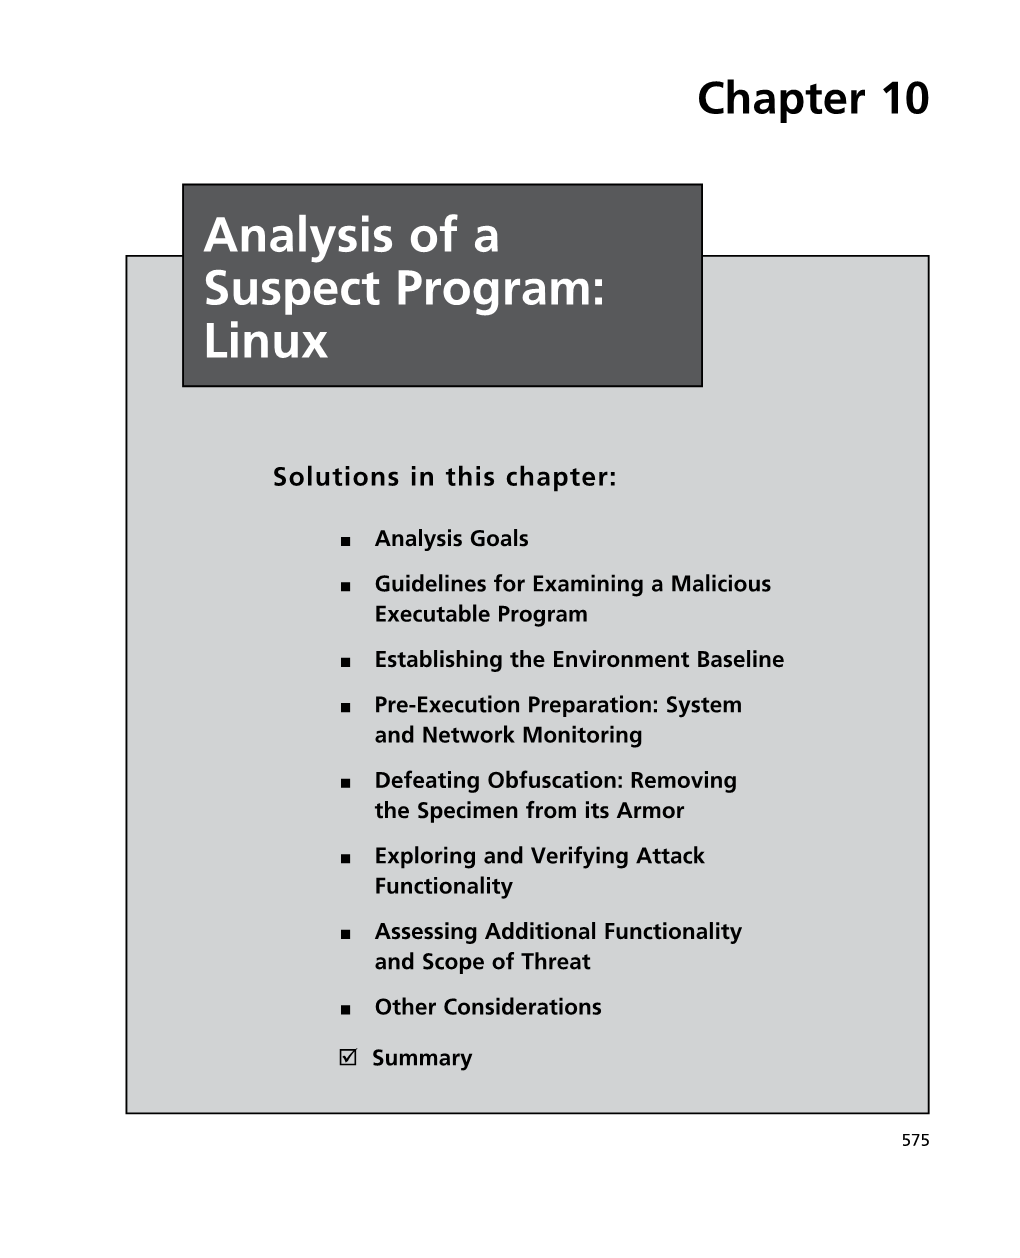 Analysis of a Suspect Program: Linux